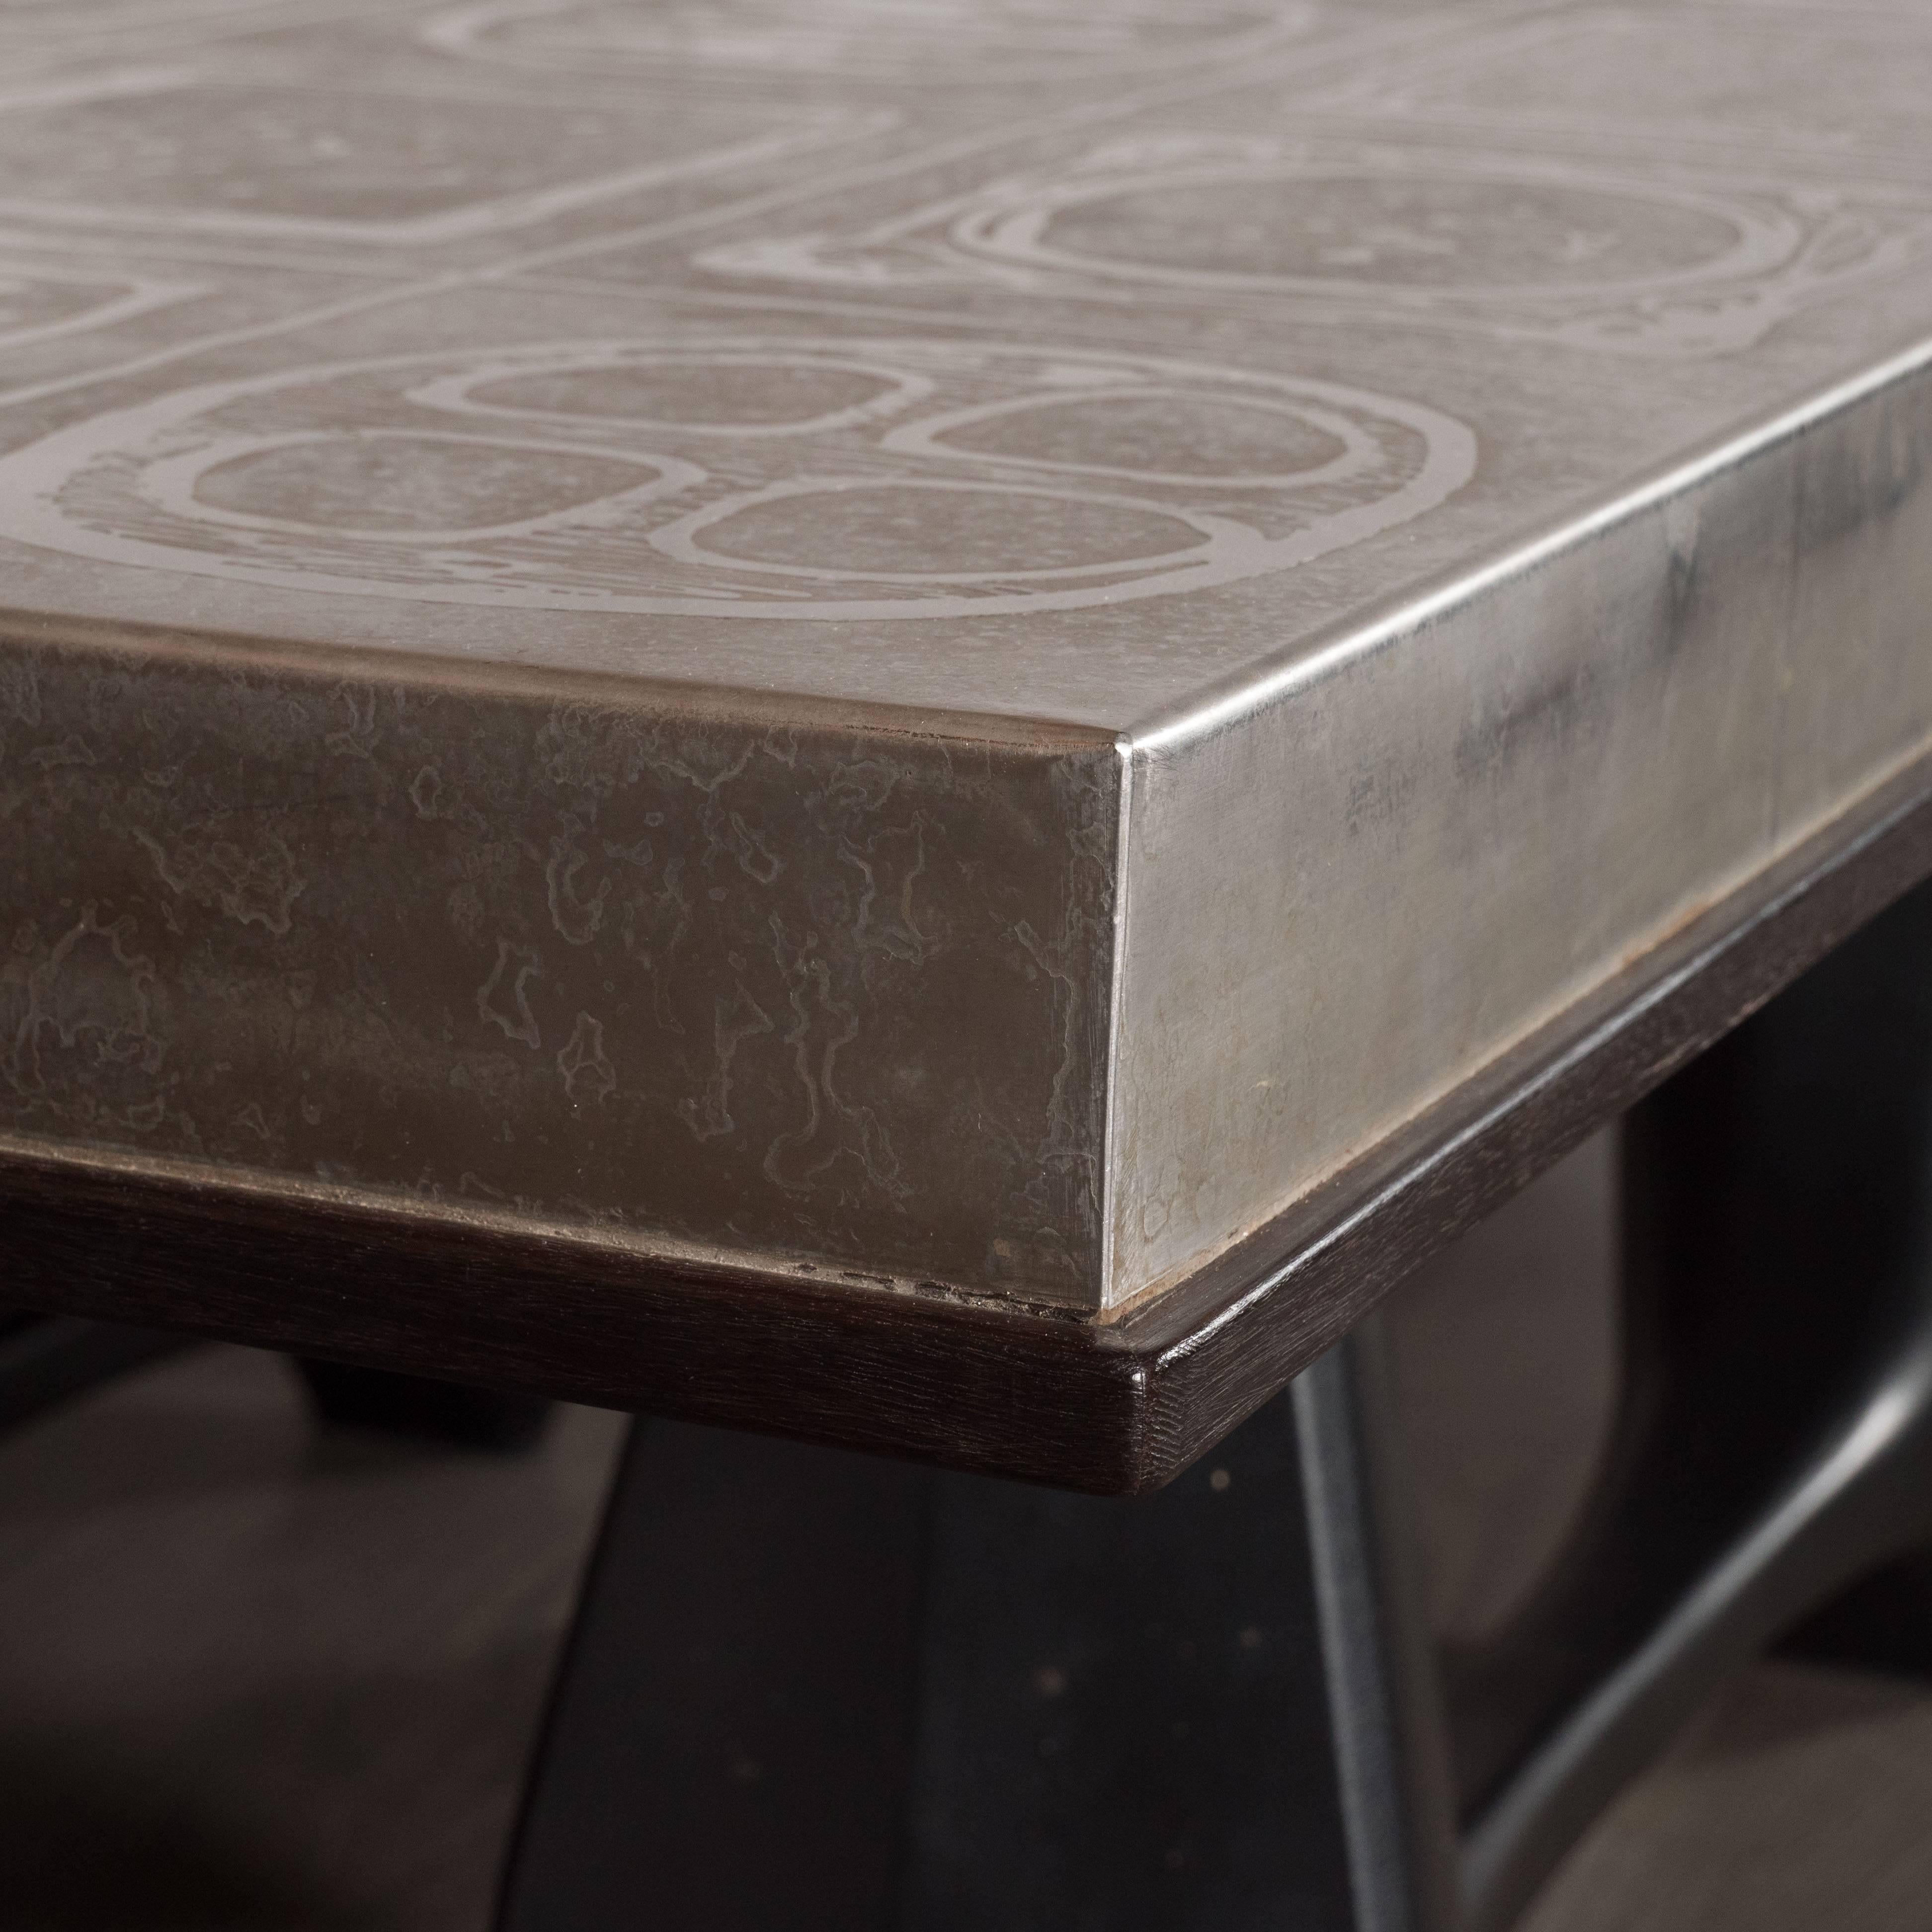 Late 20th Century Mid-Century Modernist Acid Etched Aluminum Table with Sculptural Black Base